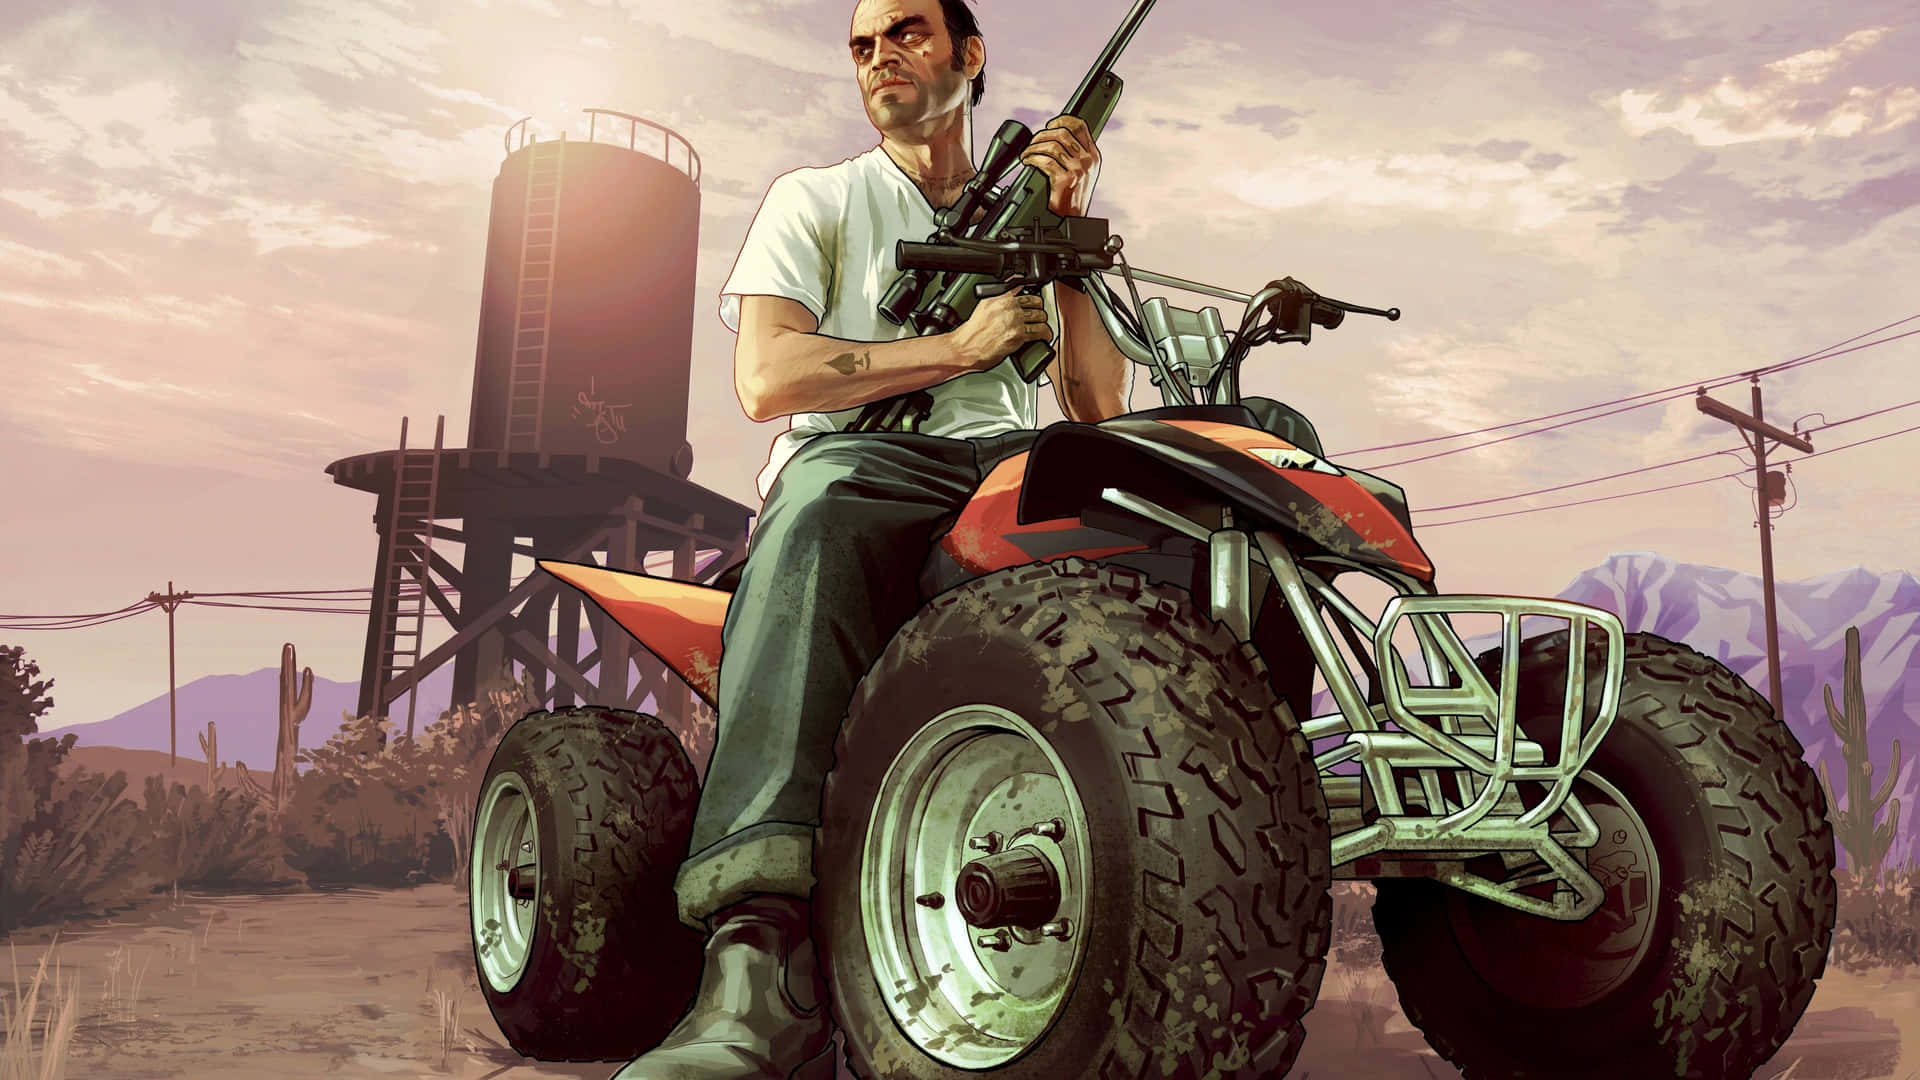 Get ready for more intense action in Grand Theft Auto Online Wallpaper